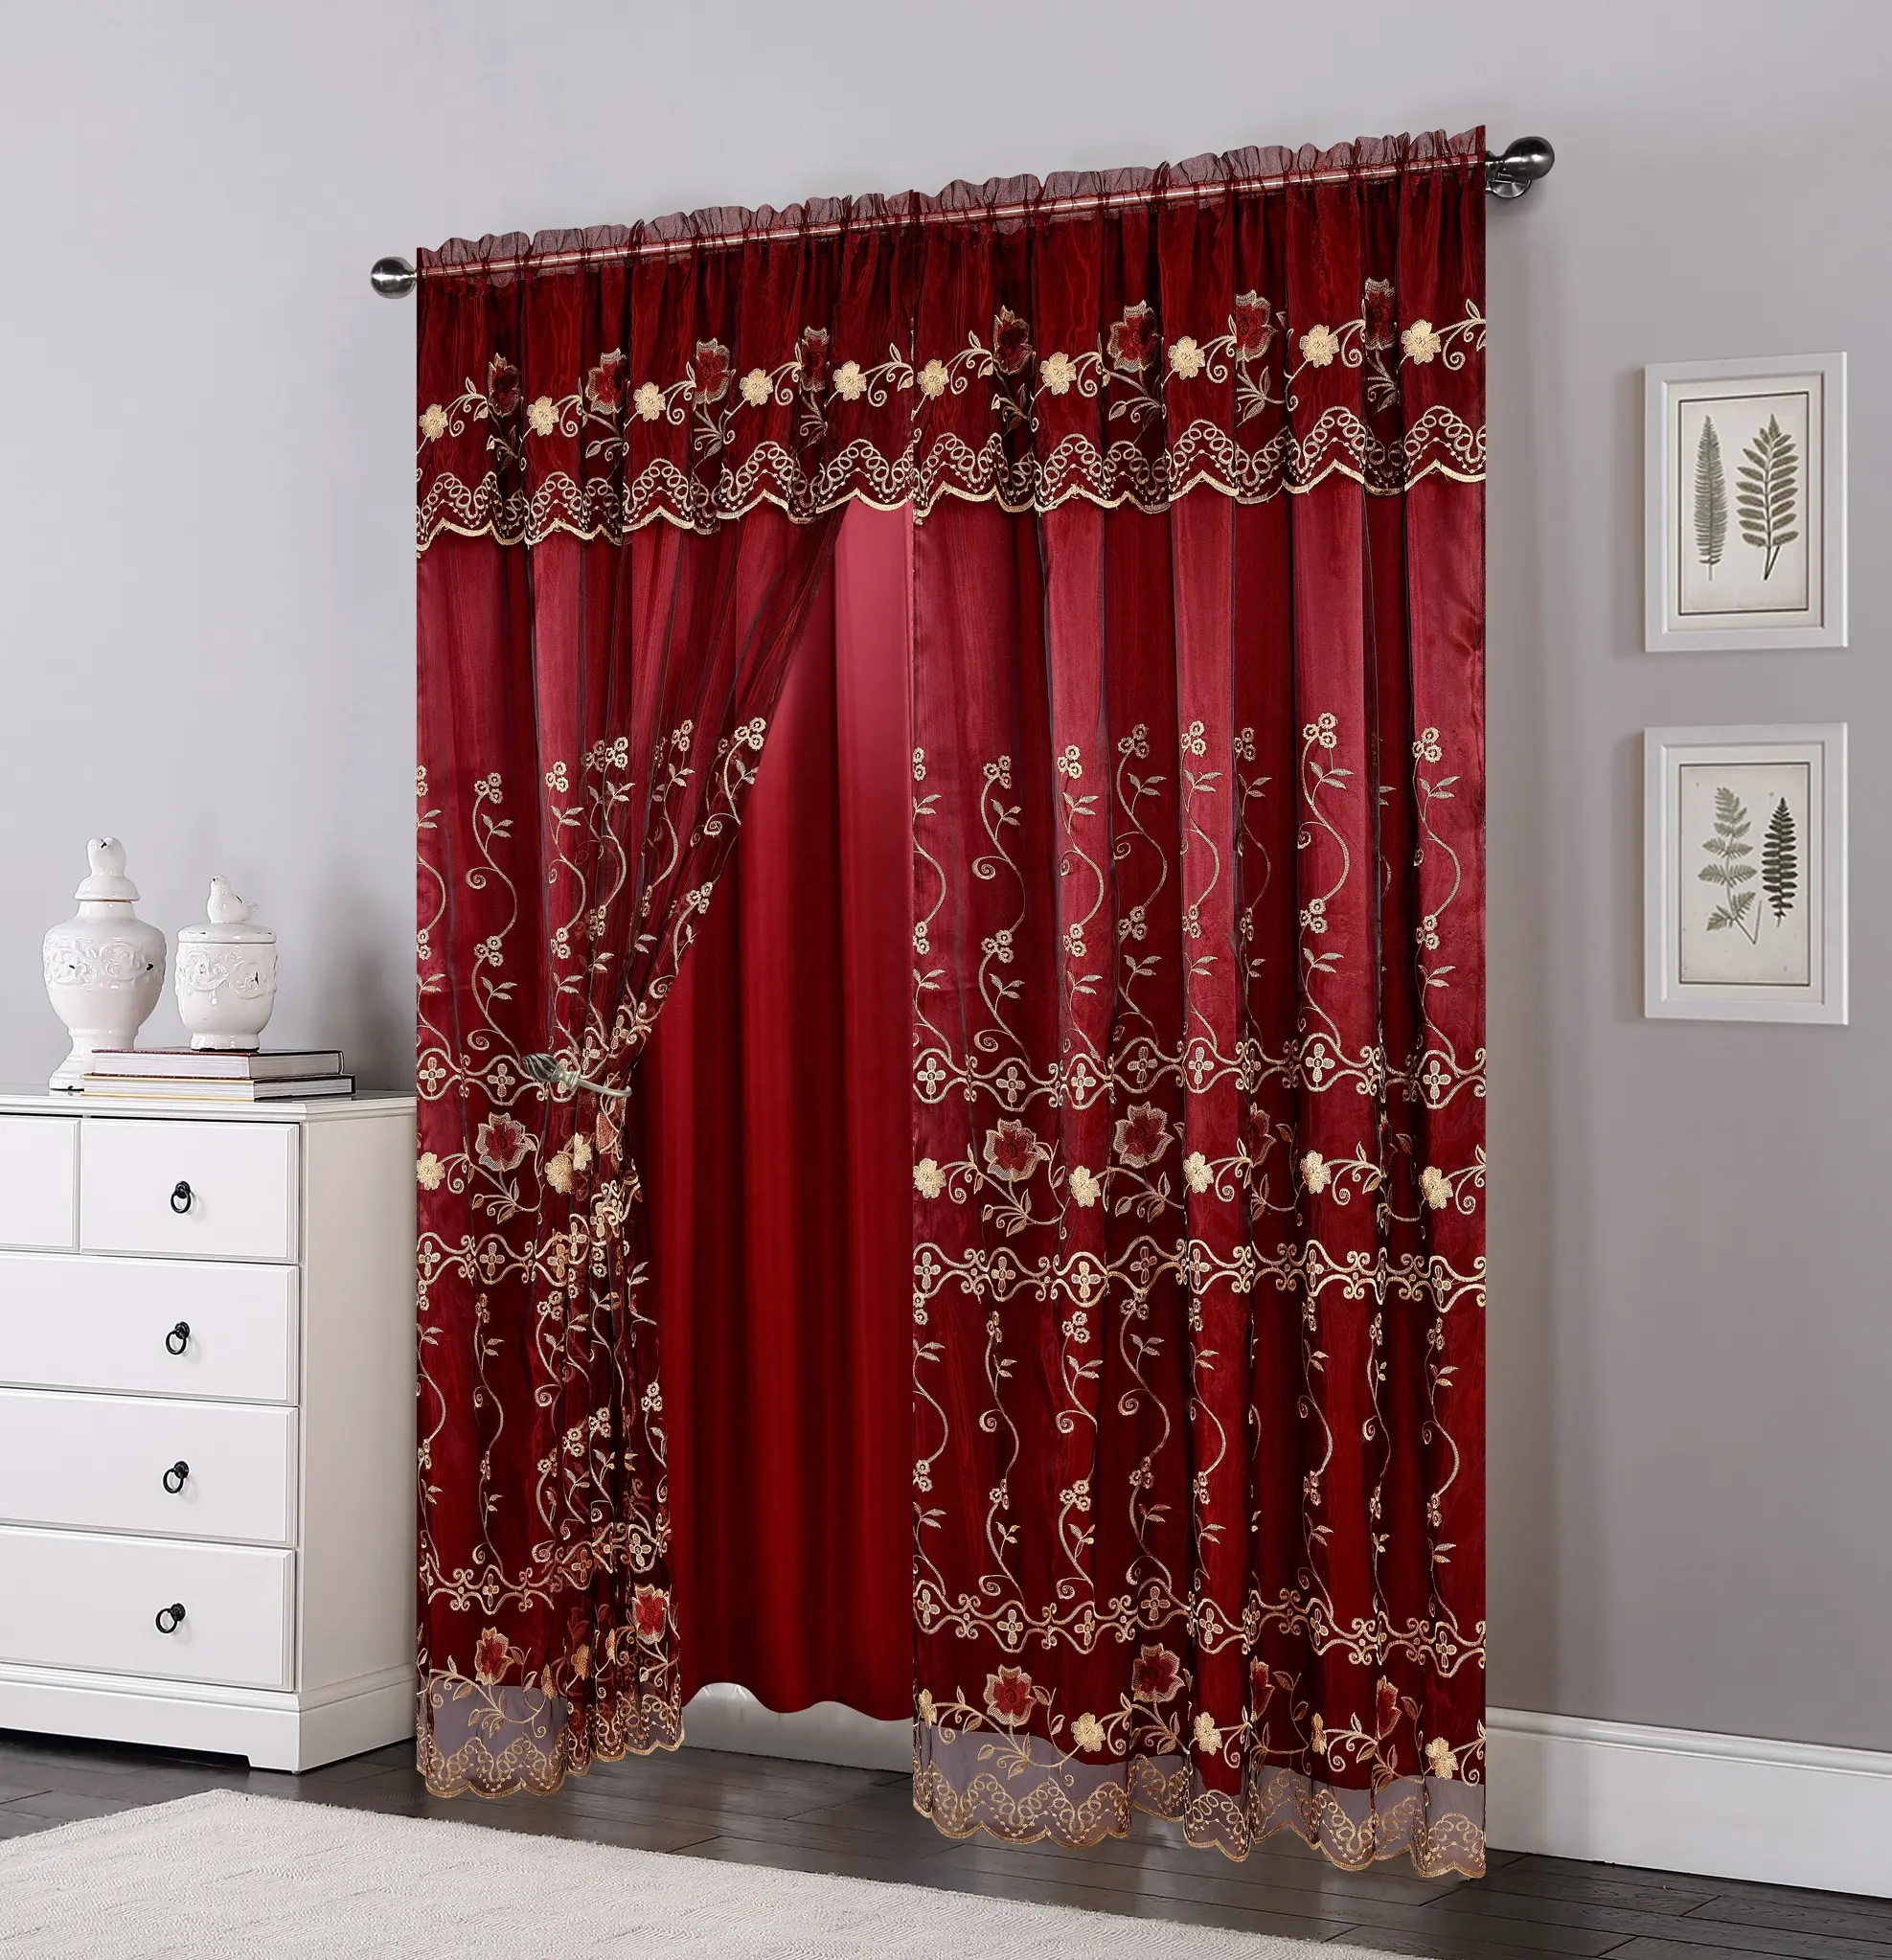 2021 Wholesale ready fancy floral tulle lace embroidery curtains for windows valance cheap sheer embroidered curtain wholesale